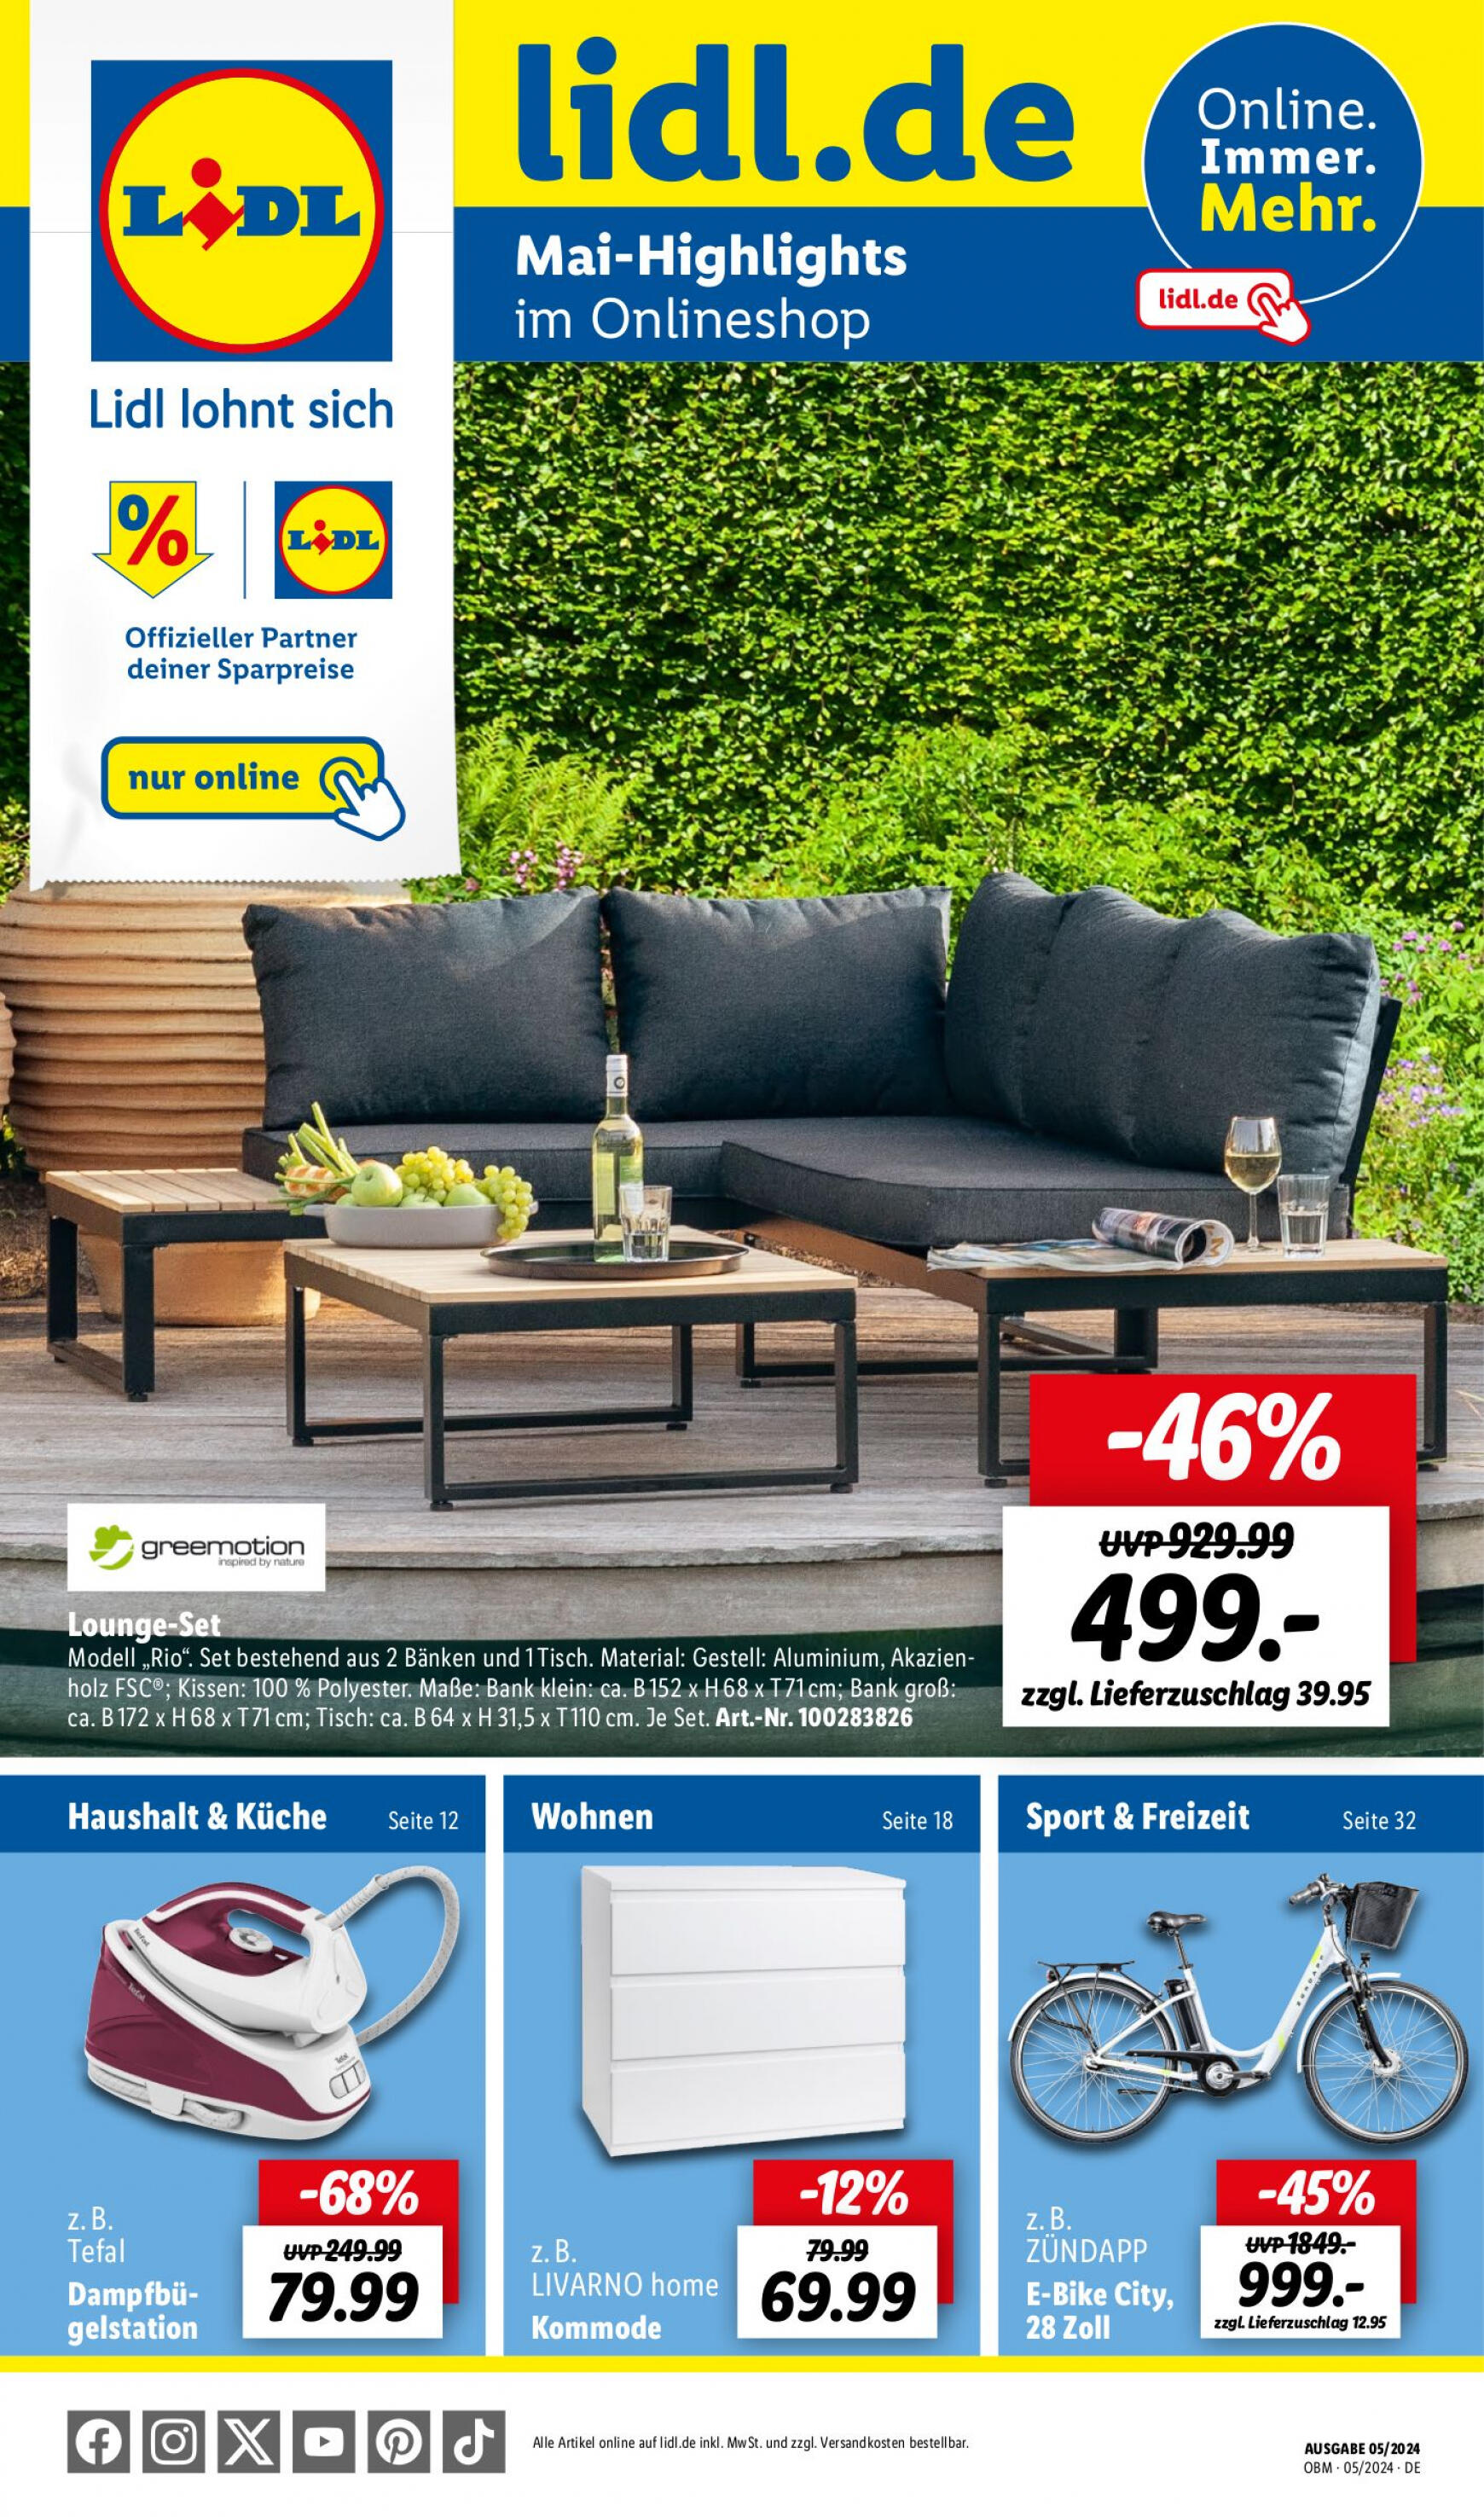 lidl - Flyer Lidl - Aktuelle Onlineshop-Highlights aktuell 01.05. - 31.05. - page: 1